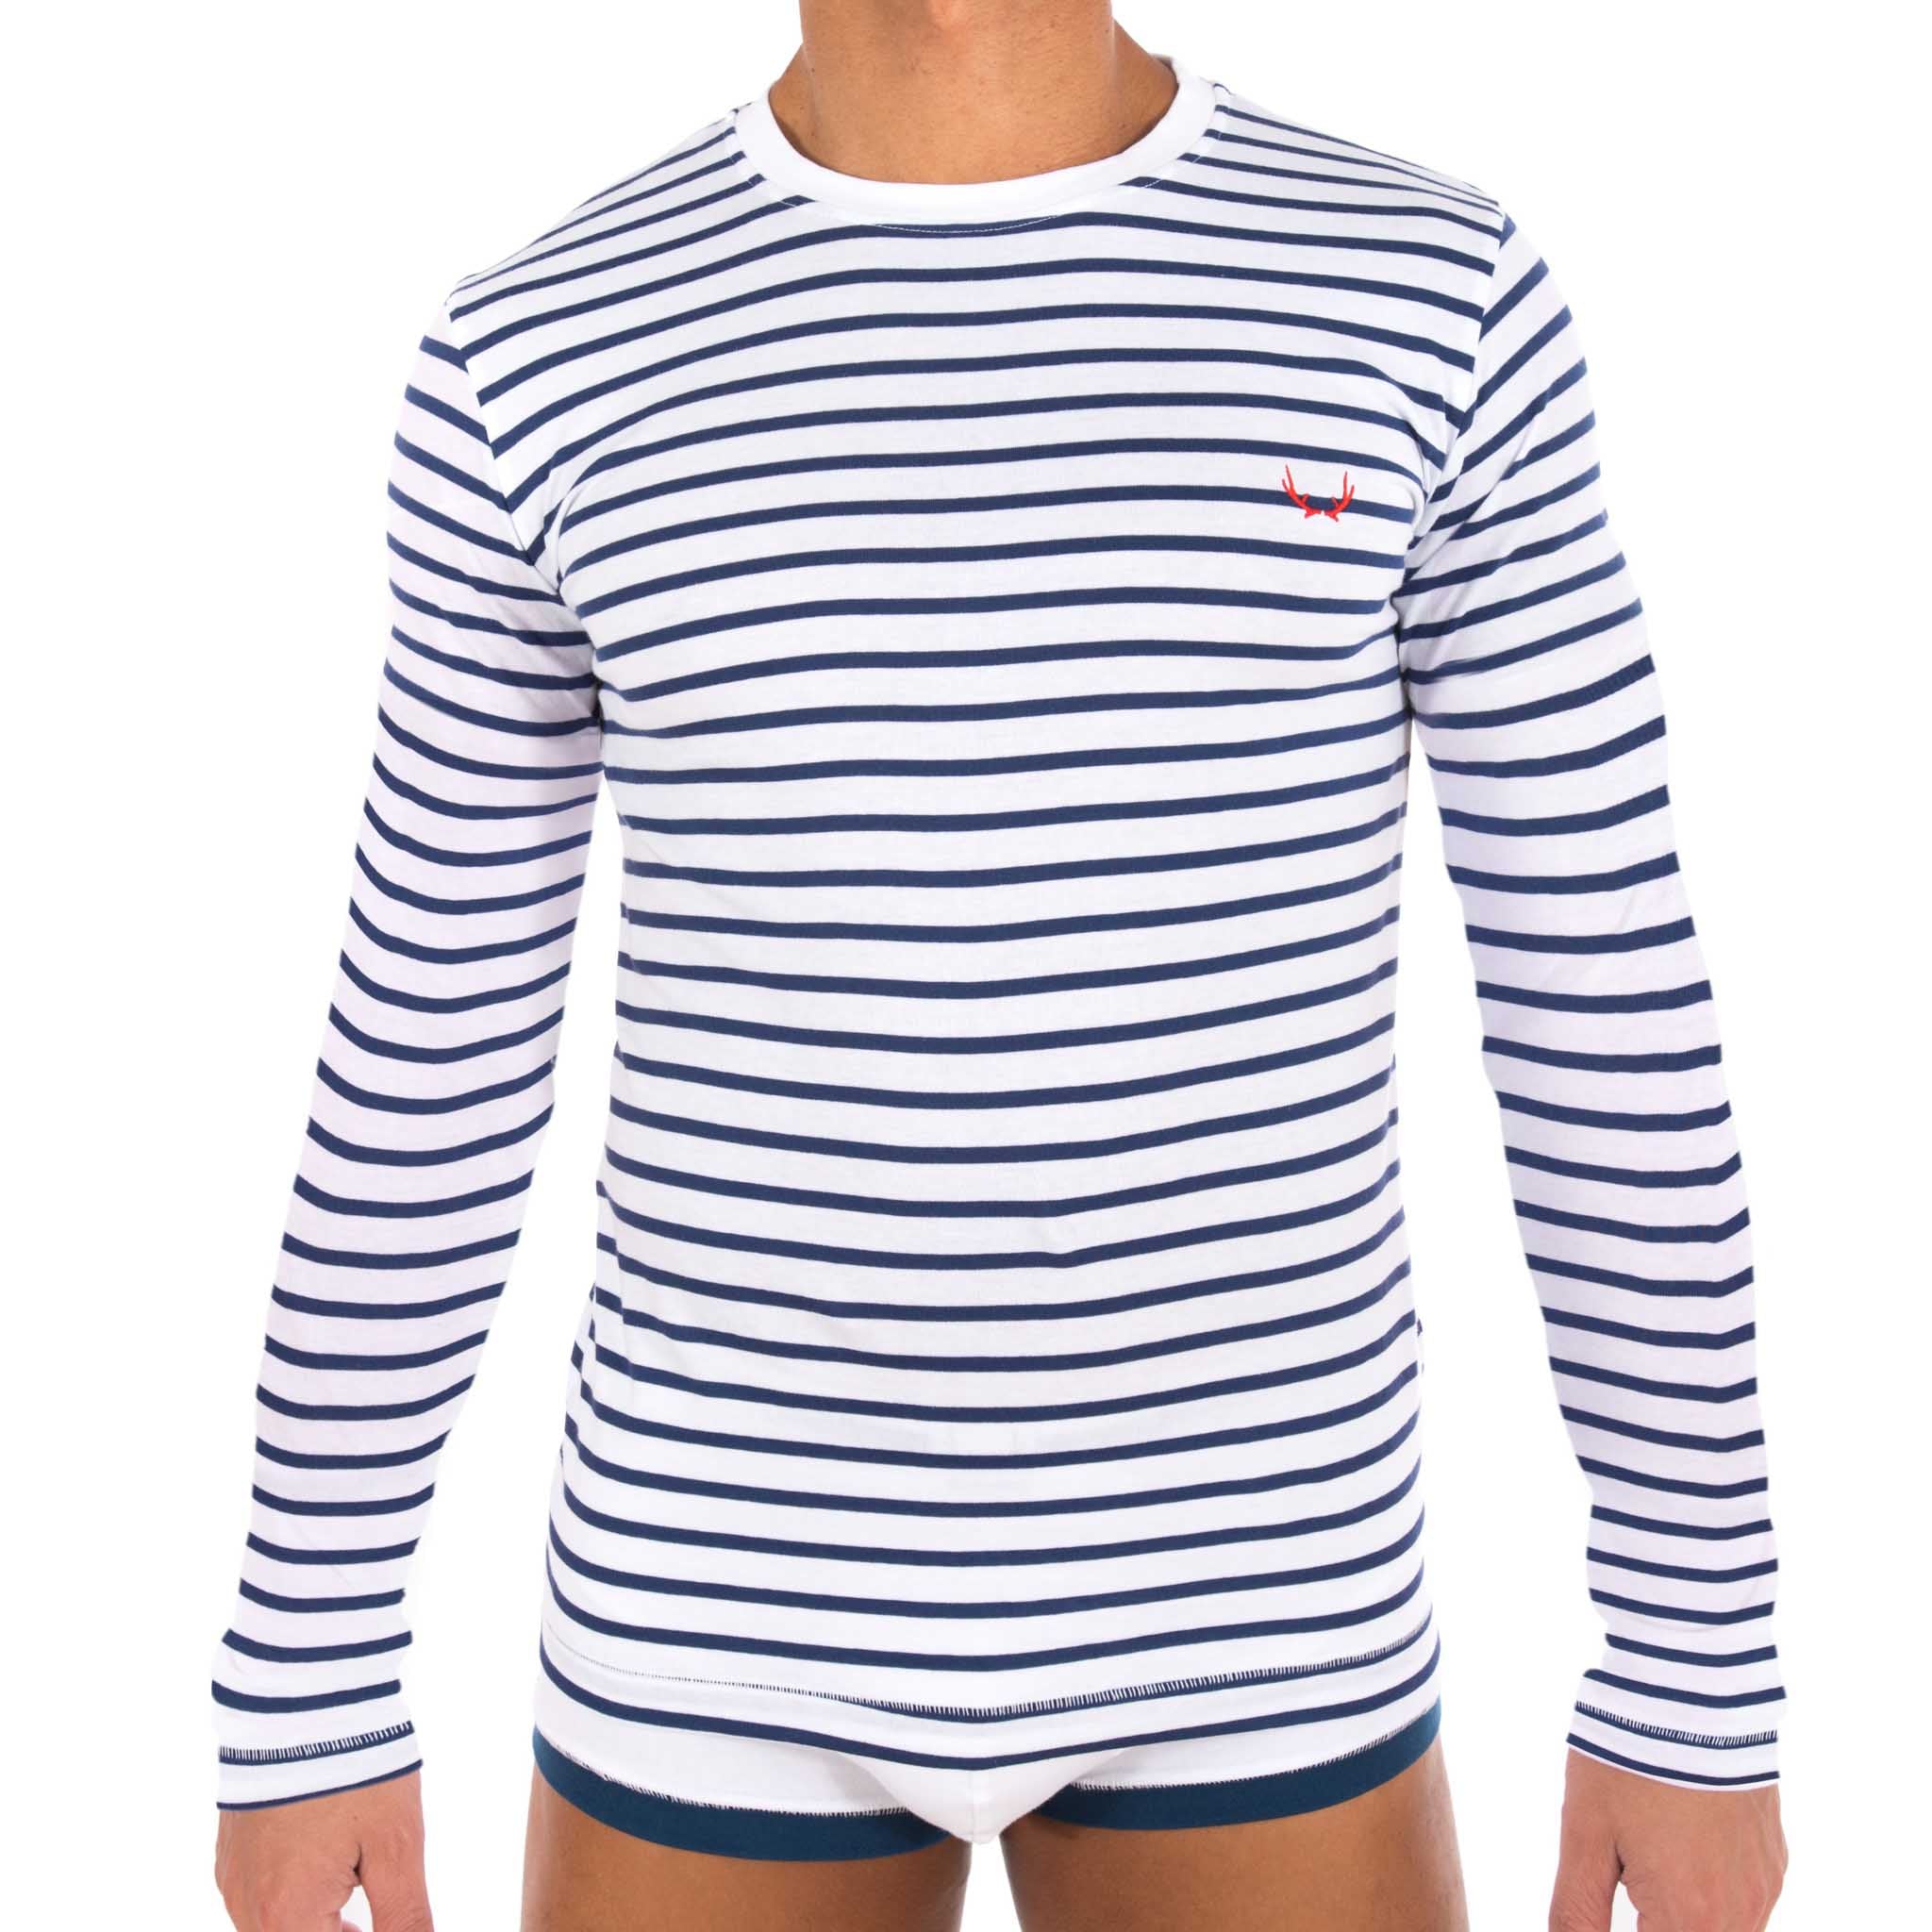 White and blue striped, long-sleeved T-shirt made of organic cotton from Bluebuck